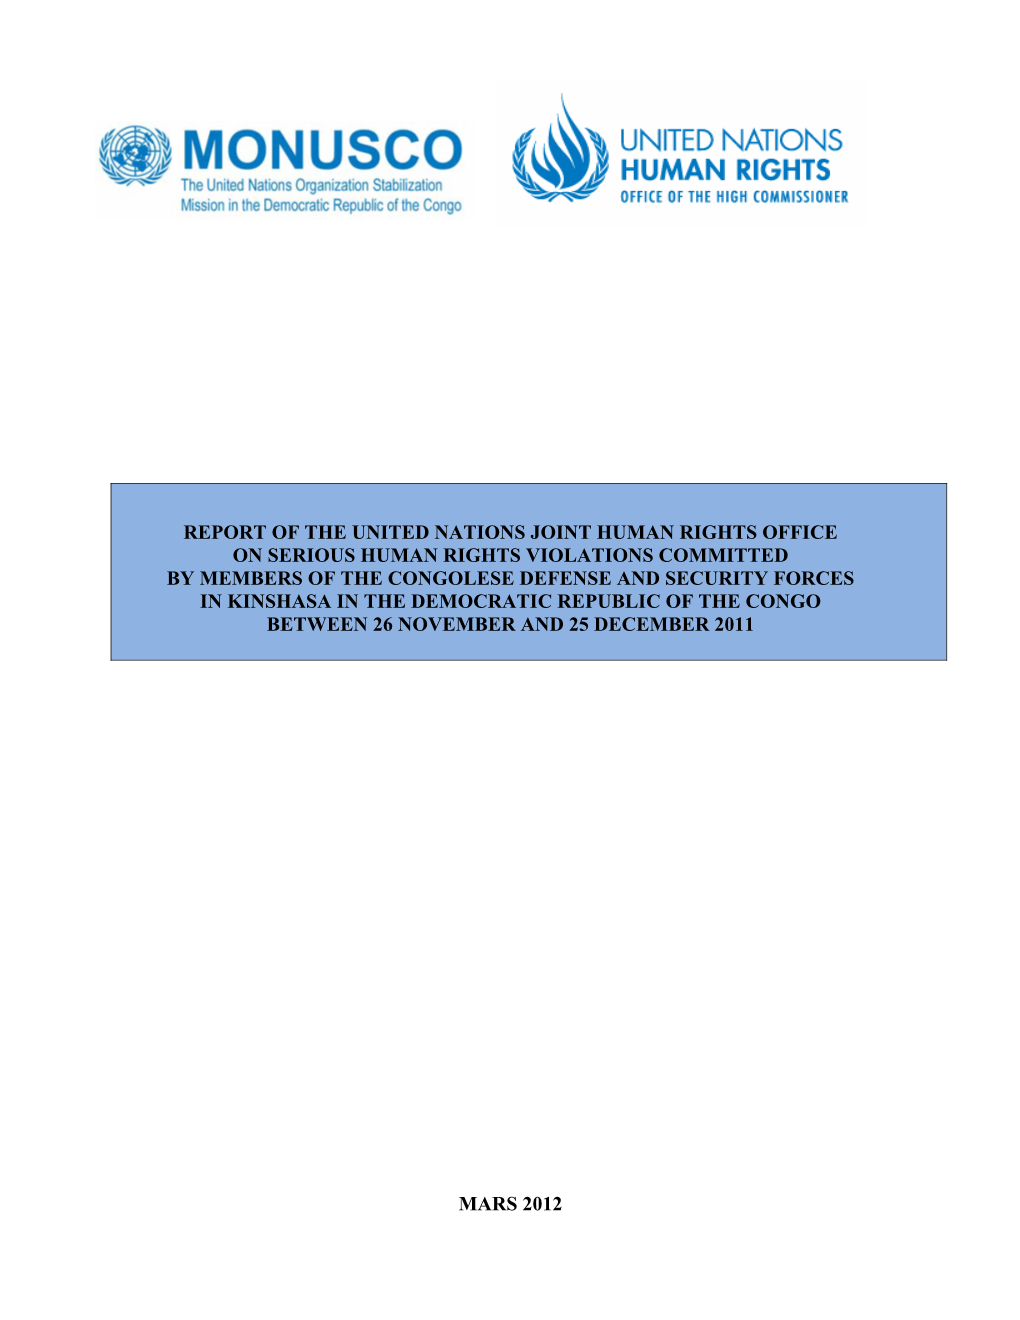 Report of the UN Joint Human Rights Office on Serious Human Rights